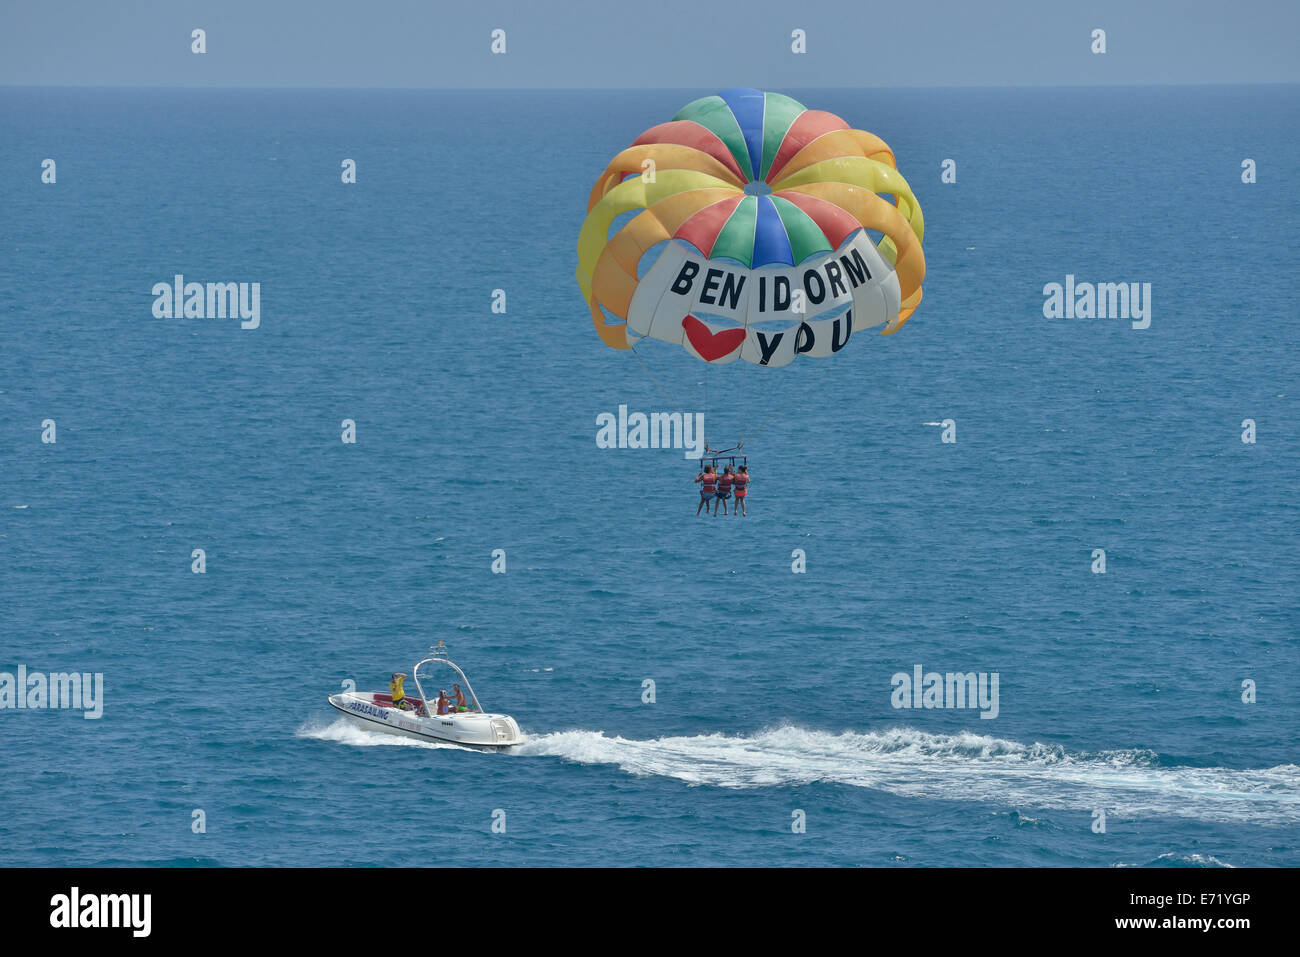 Excursion boat with paraglider, labeled &quot;Benidorm loves you&quot;, Playa Levante, Benidorm, Costa Blanca, Spain Stock Photo